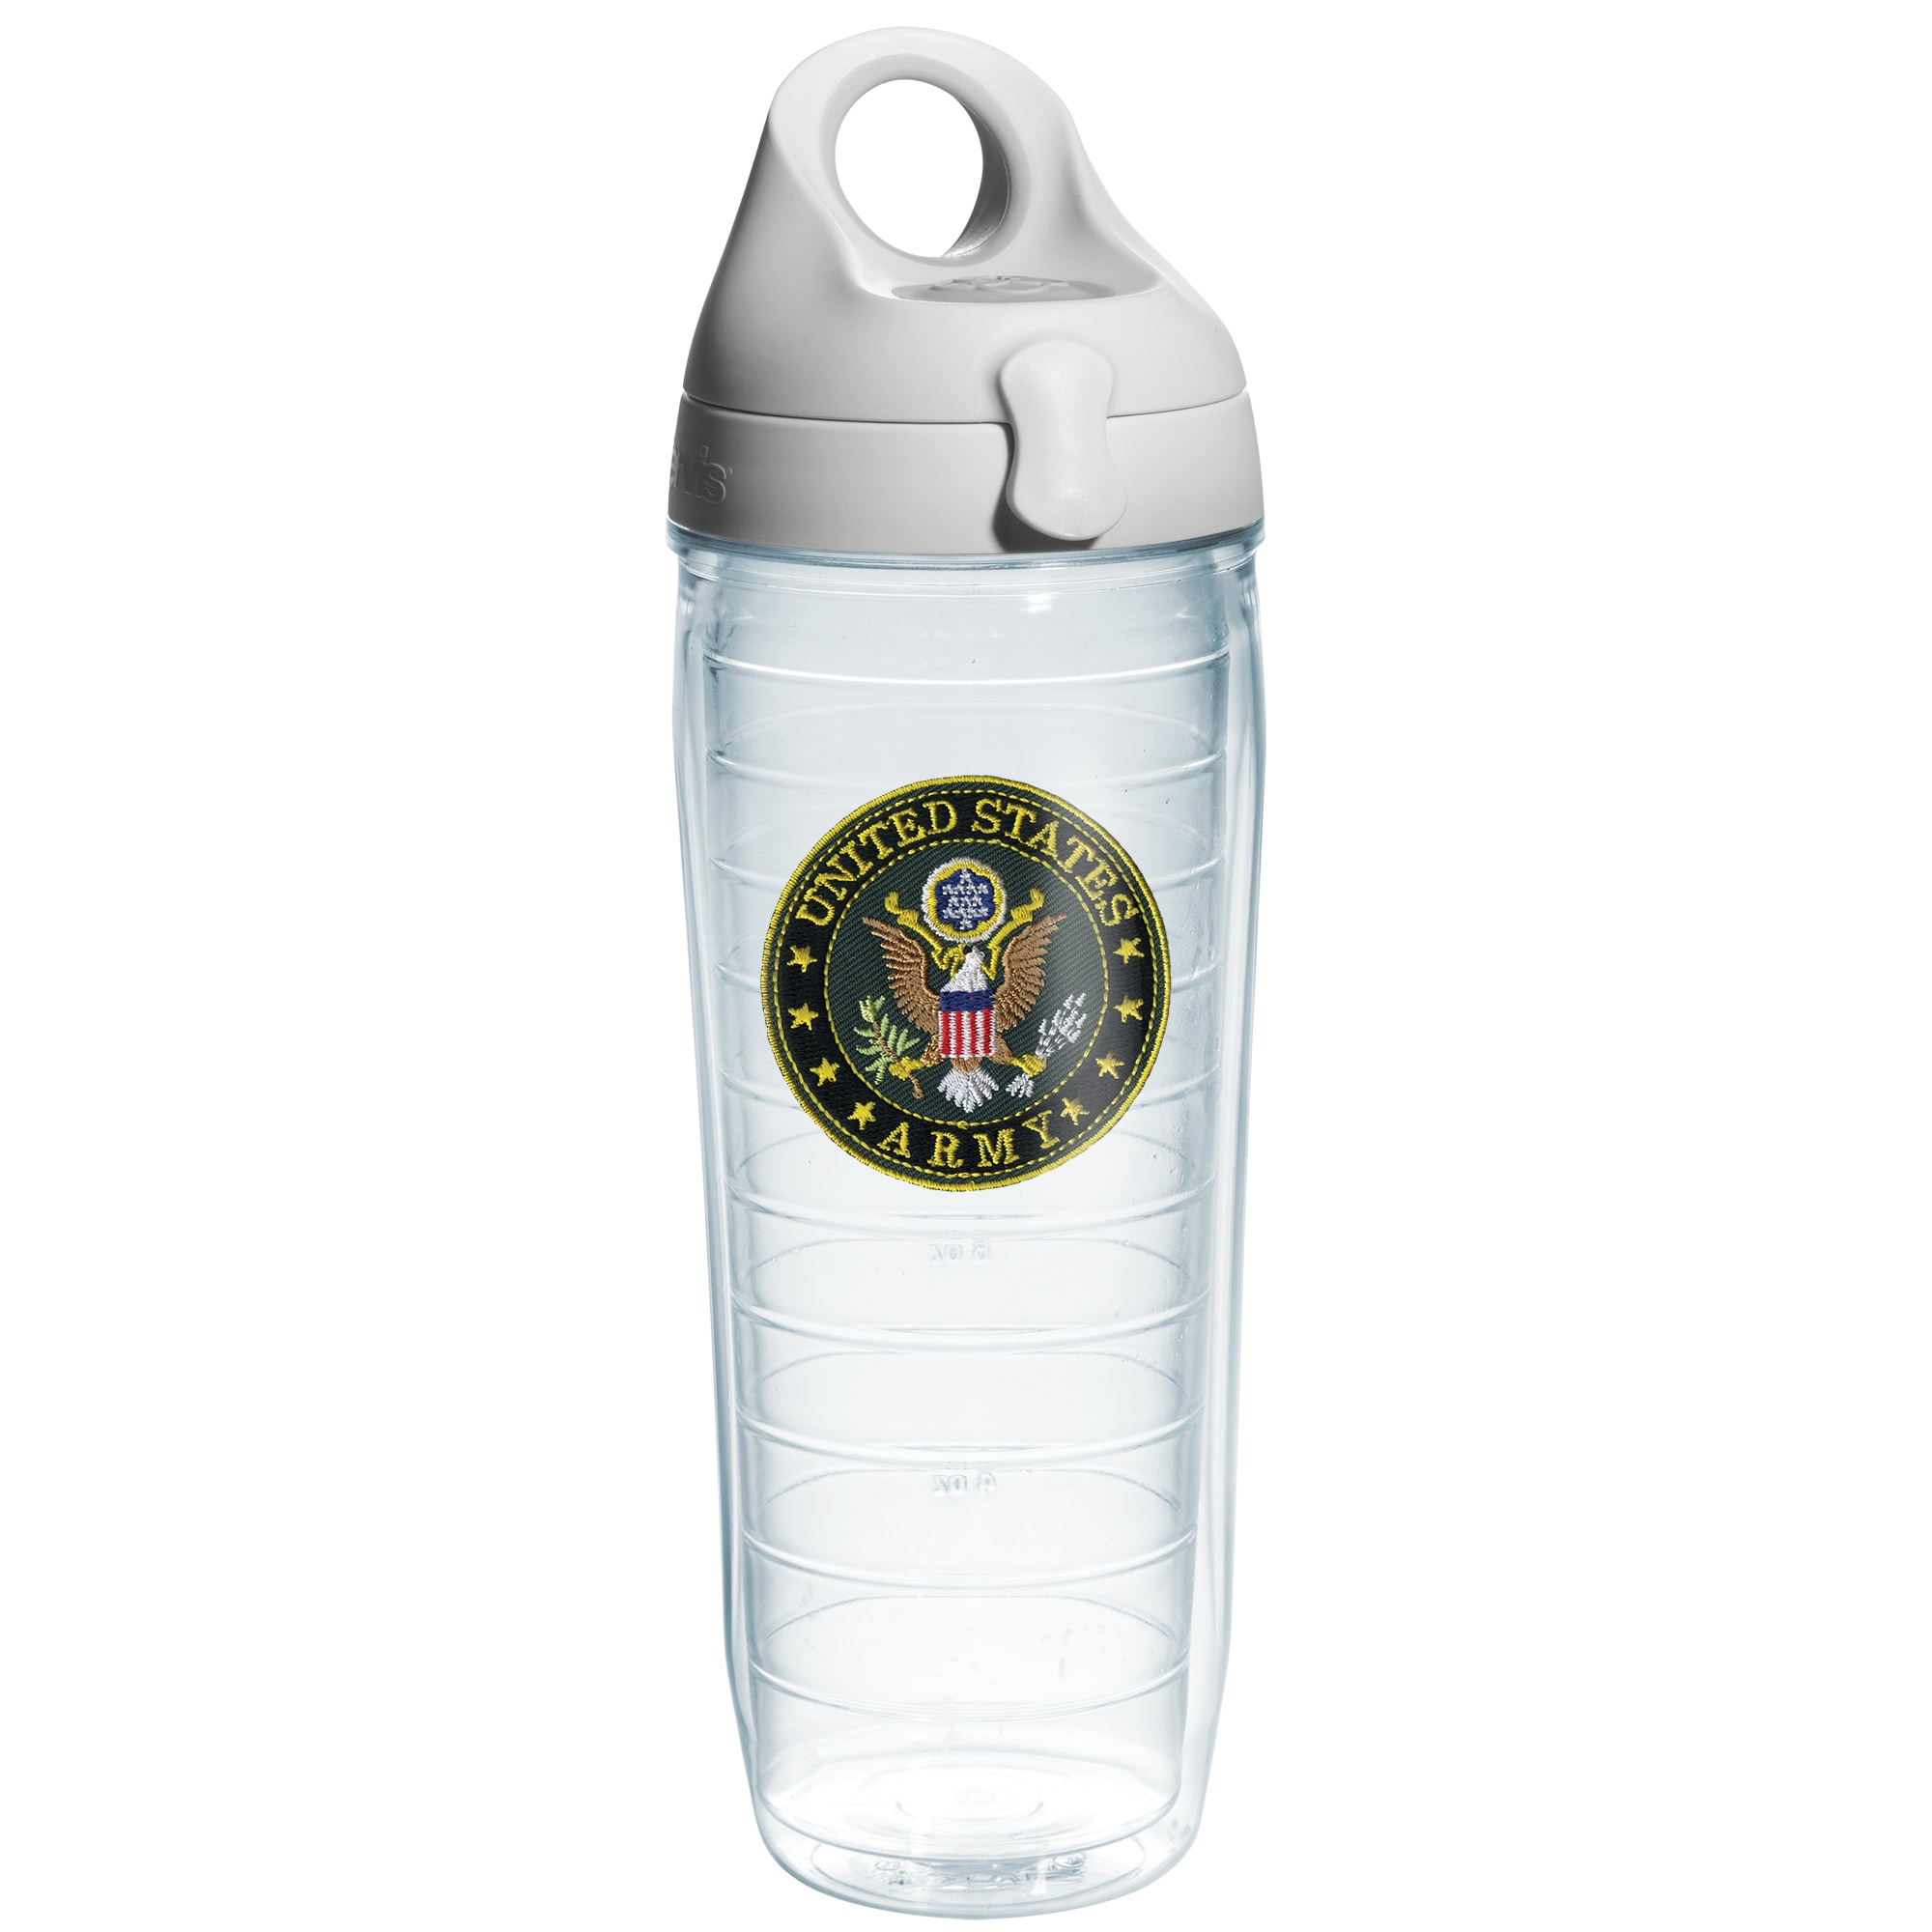 Ohio State Tervis Water Bottle In Good Shape! - household items